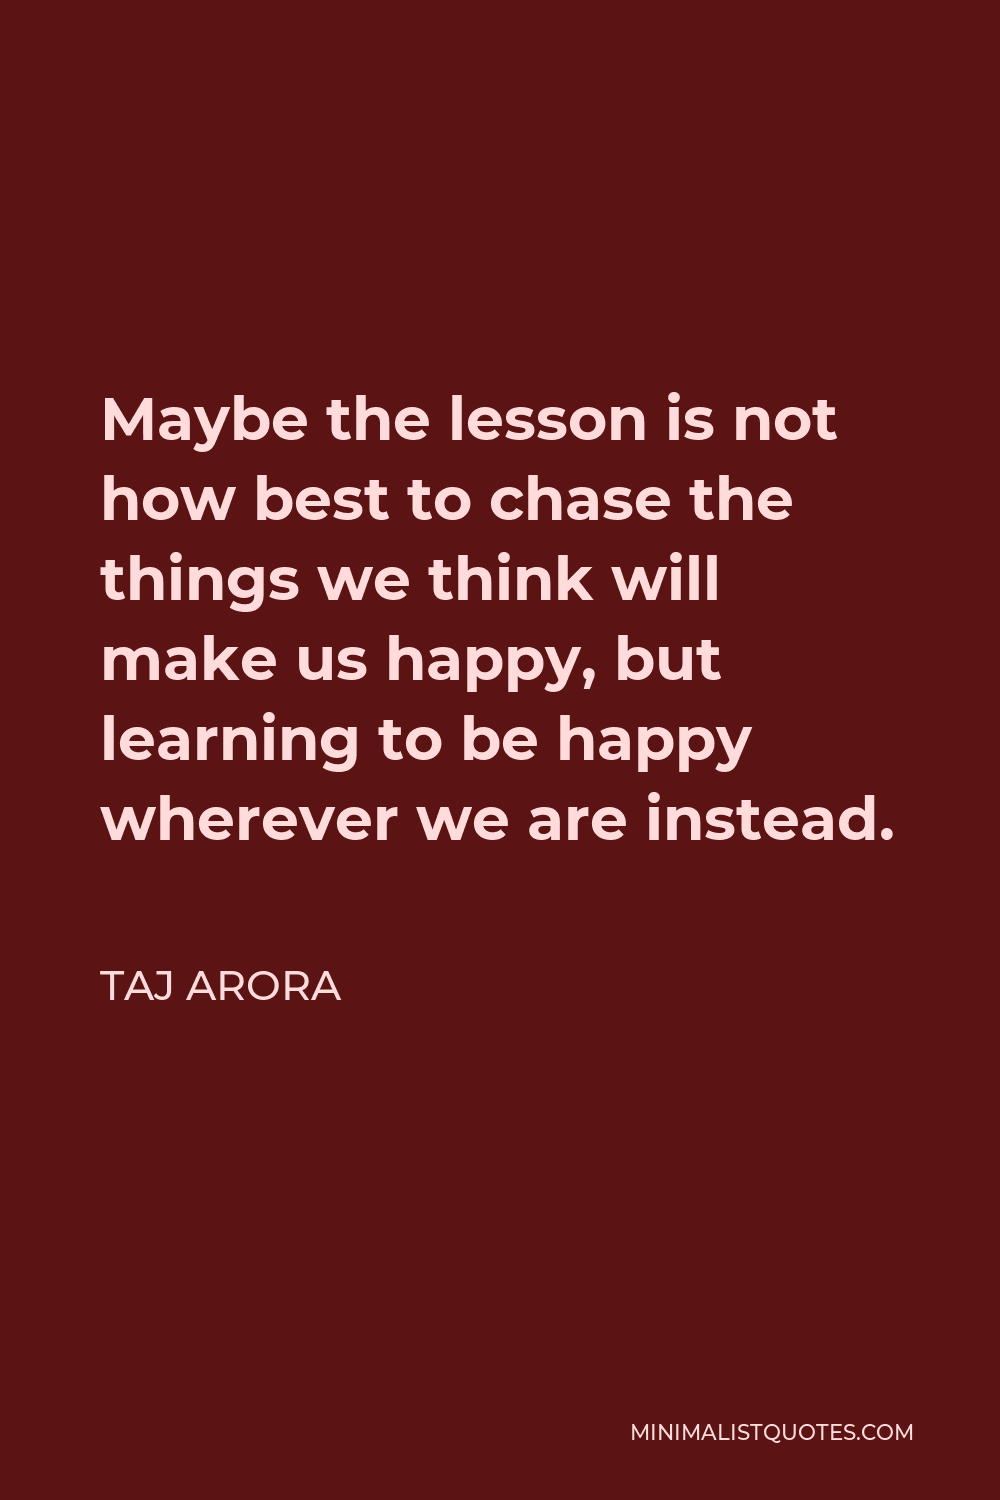 Taj Arora Quote - Maybe the lesson is not how best to chase the things we think will make us happy, but learning to be happy wherever we are instead.